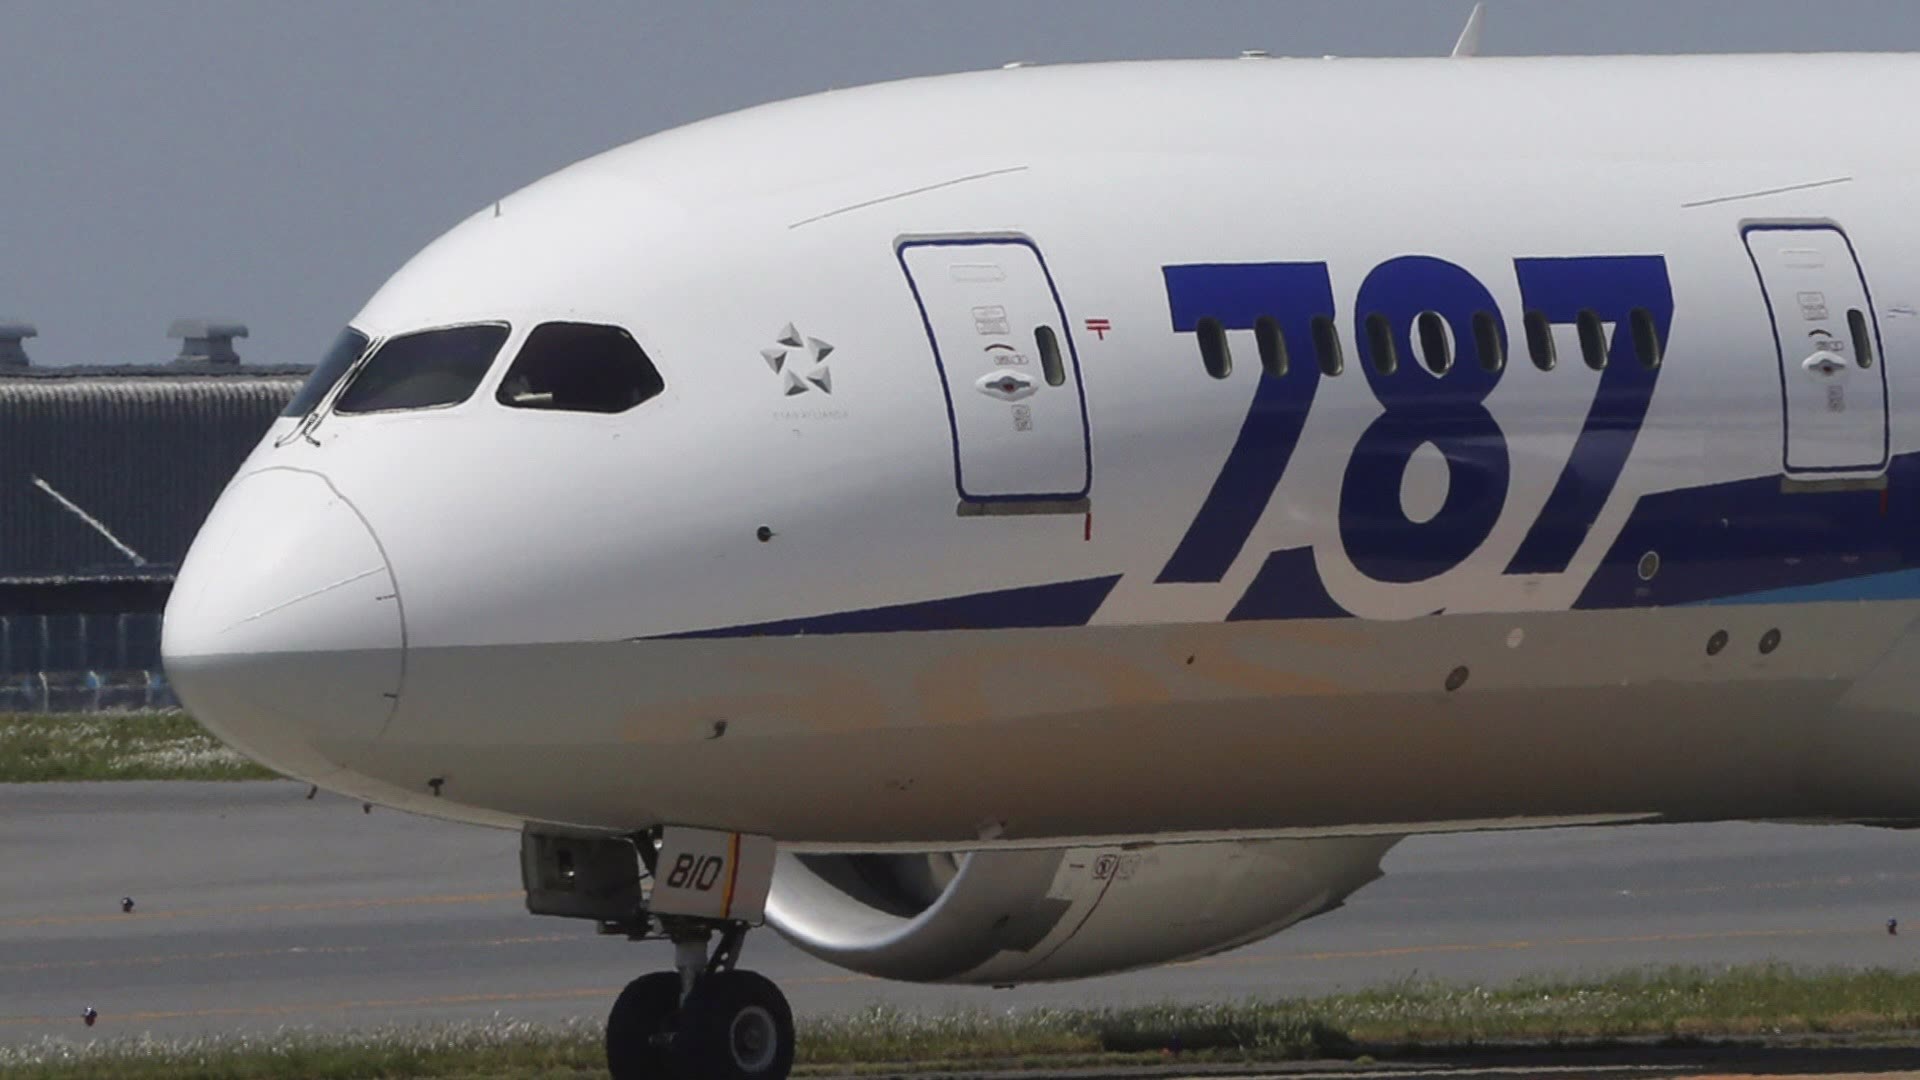 Boeing will cut production of its large 787 aircraft after a structural flaw was discovered in some undelivered planes.